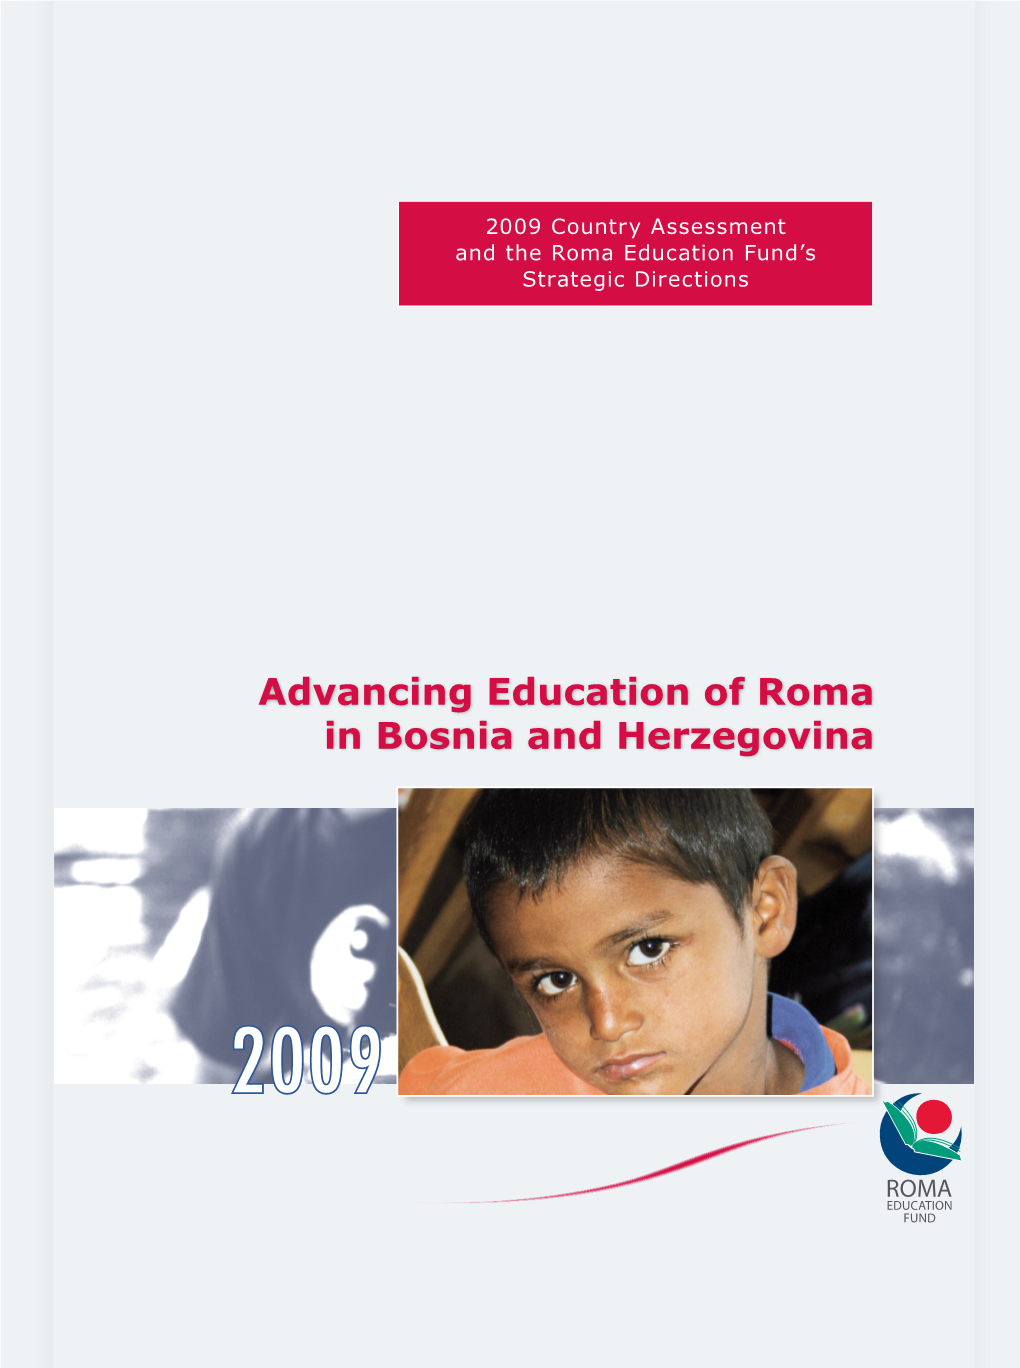 Advancing Education of Roma in Bosnia and Herzegovina